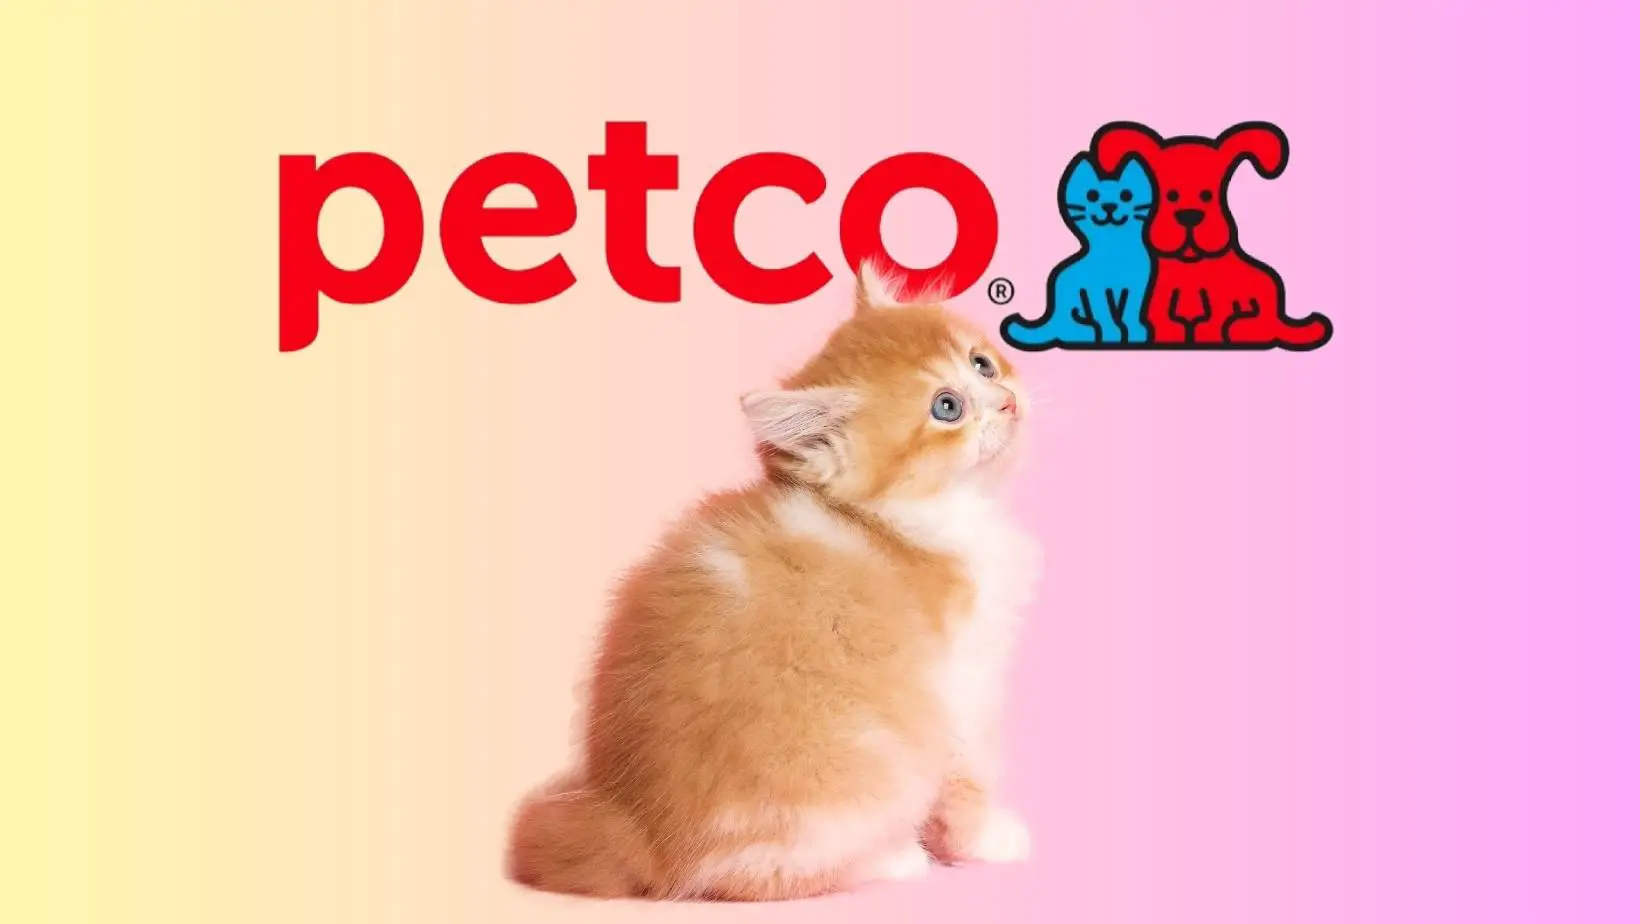 Does Petco Sell Cats?